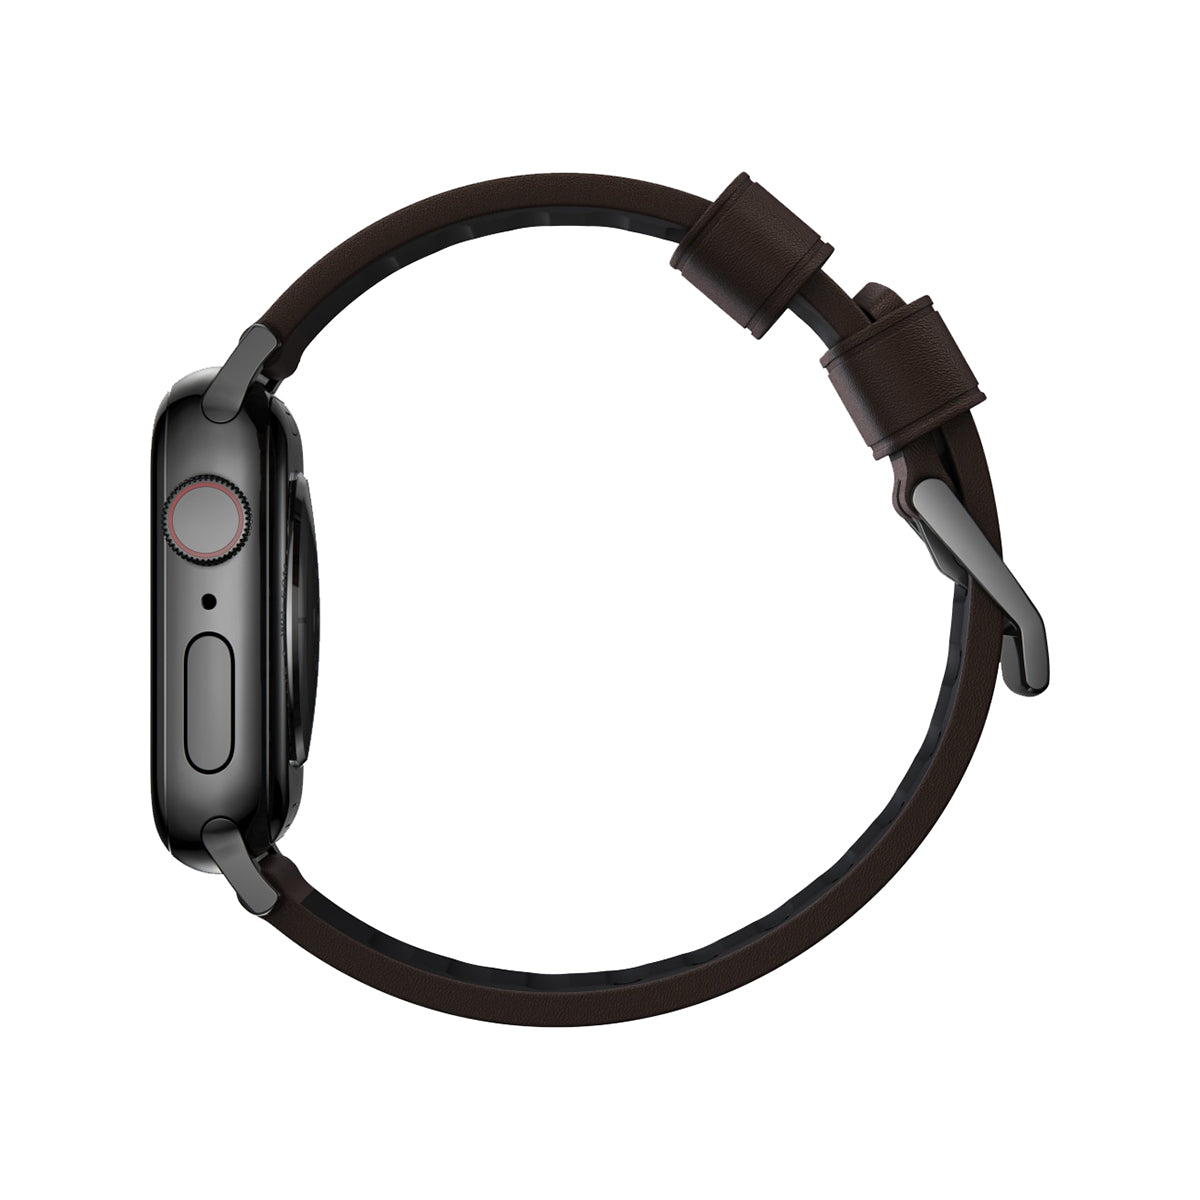 Nomad Active Band Pro 45mm - Black Hard with Brown Leather Strap.